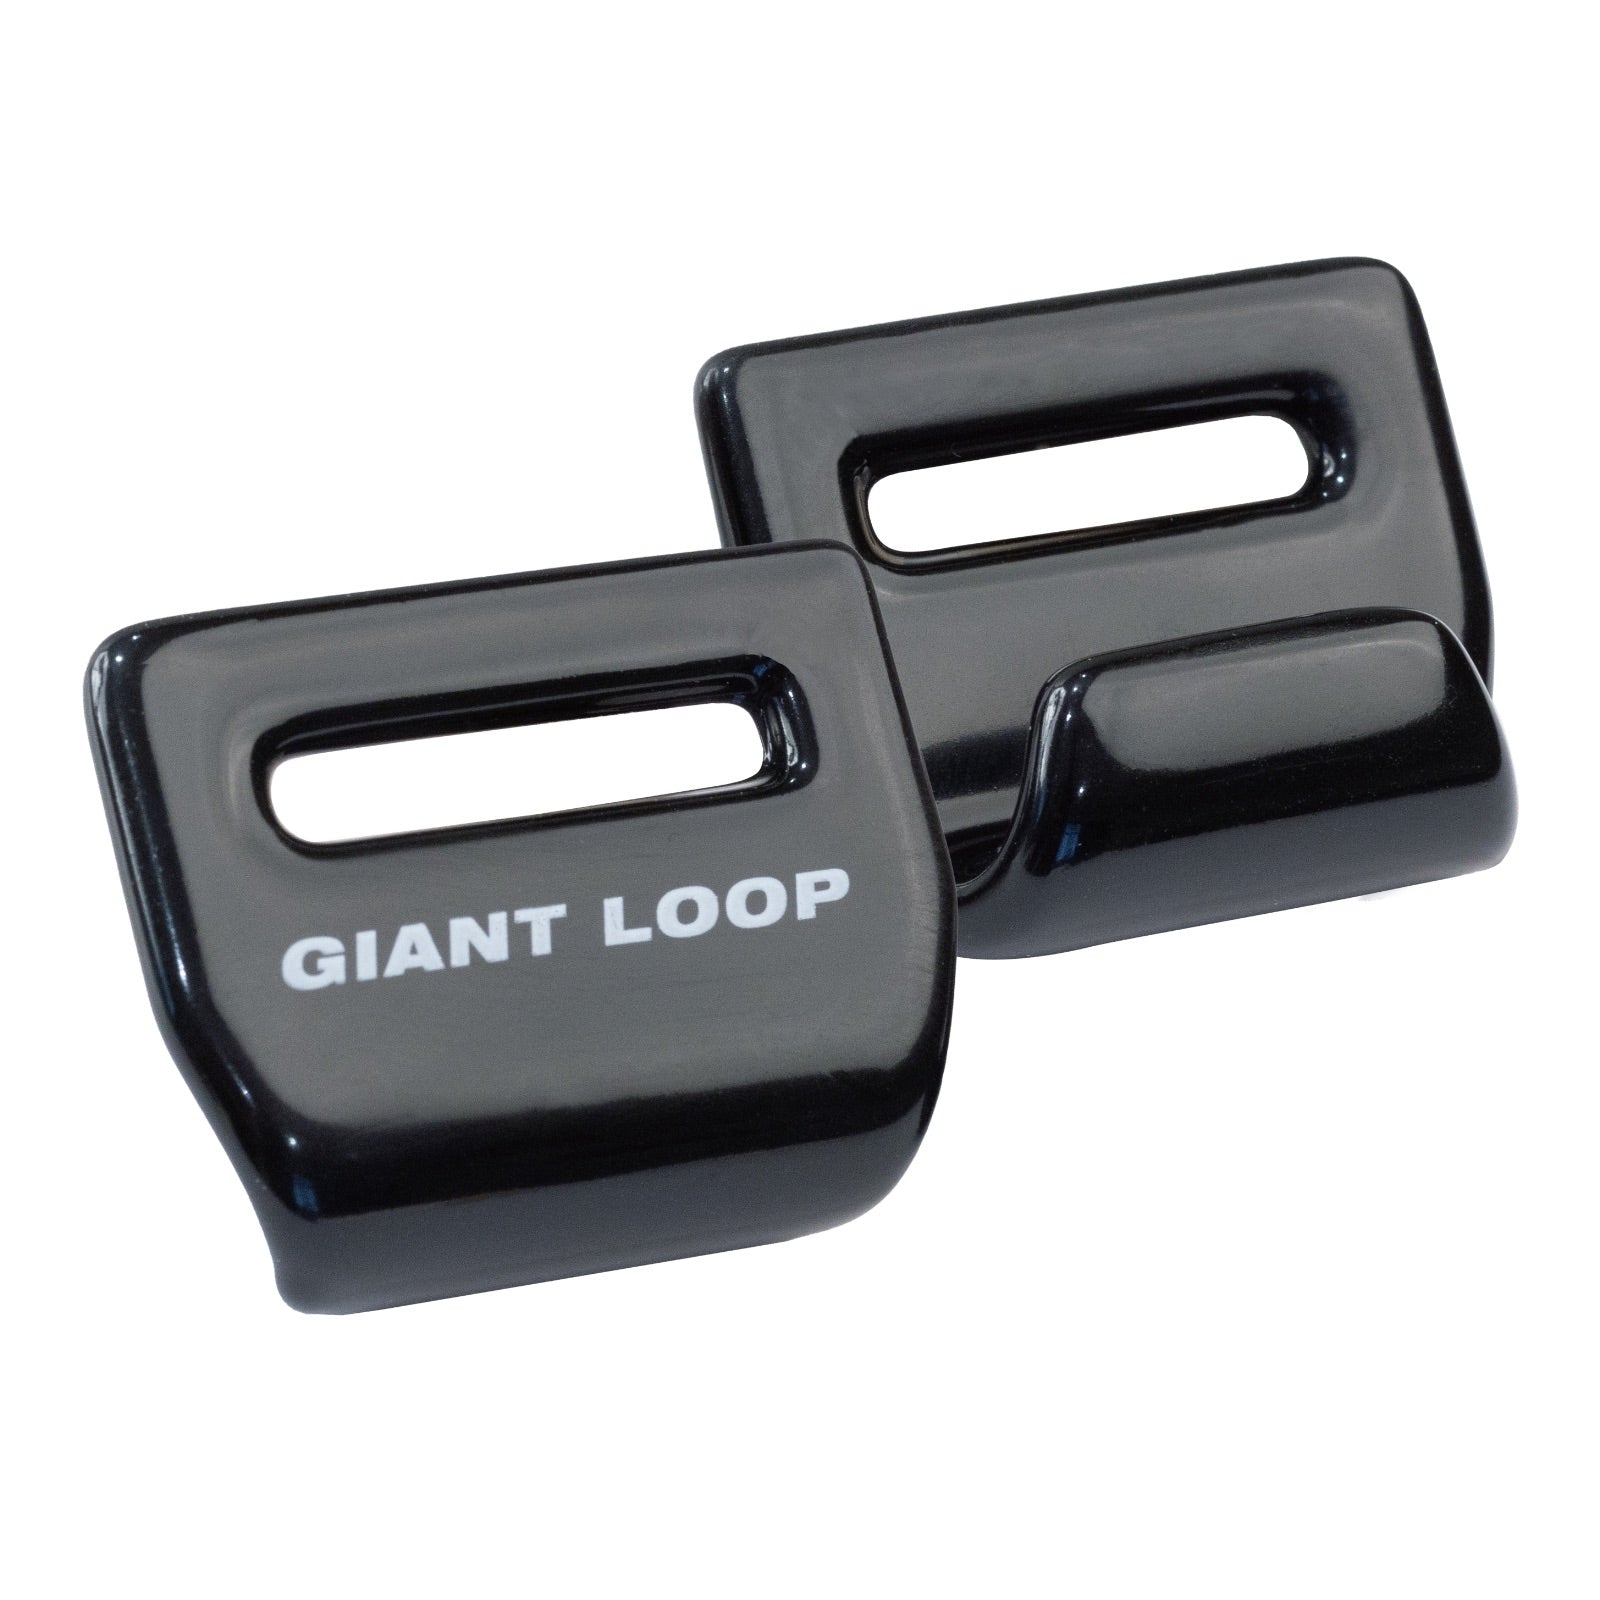 GIANT-LOOP Strap Anchor